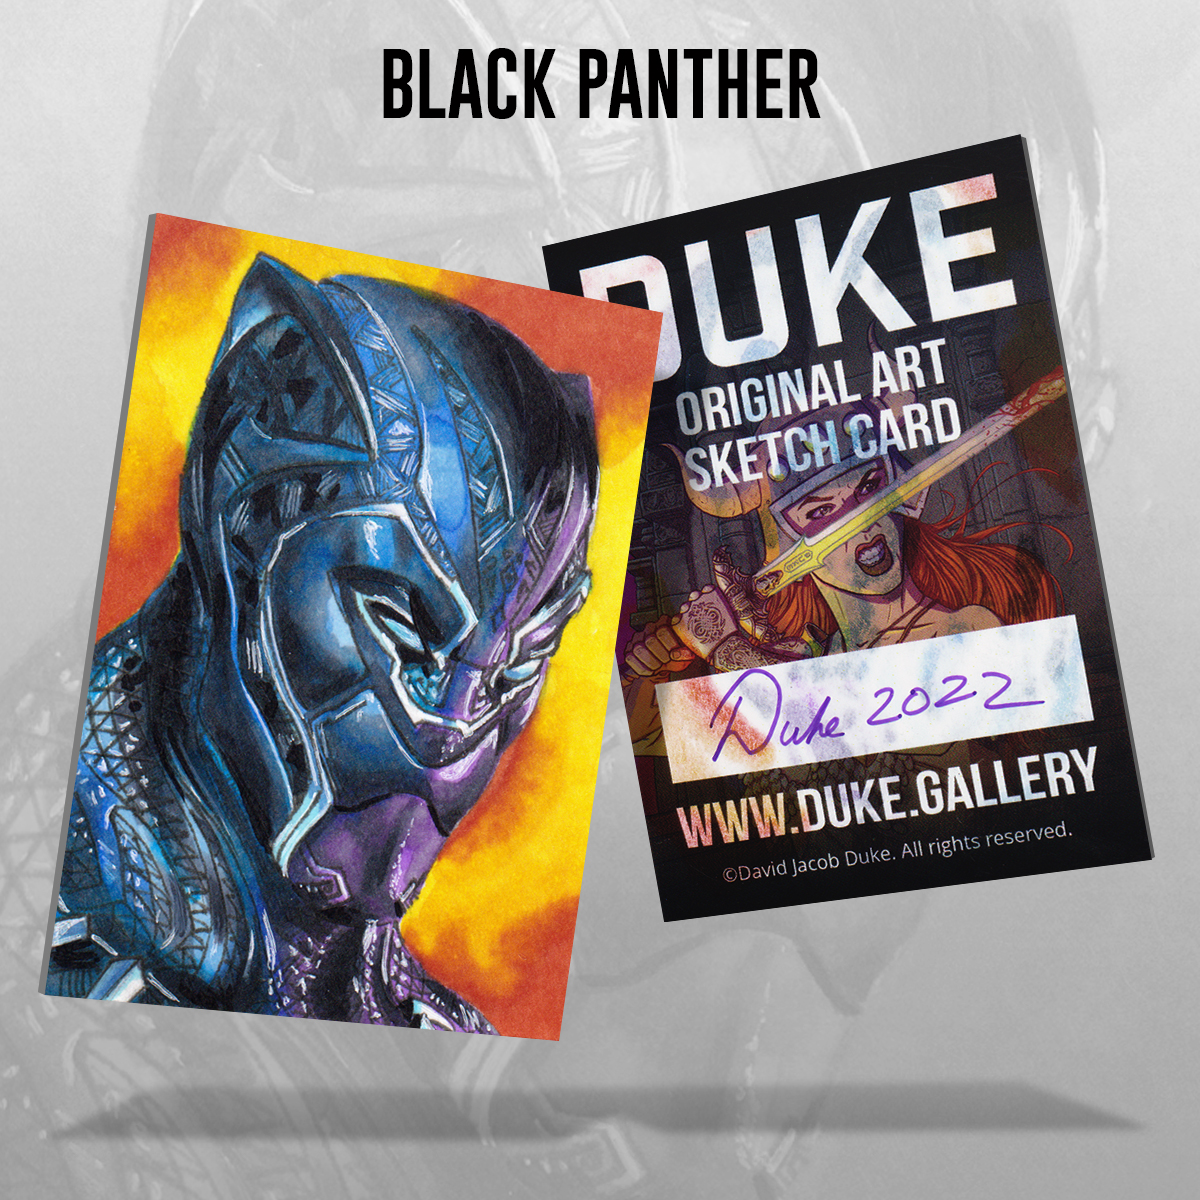 Black Panther Sketch Card by Duke